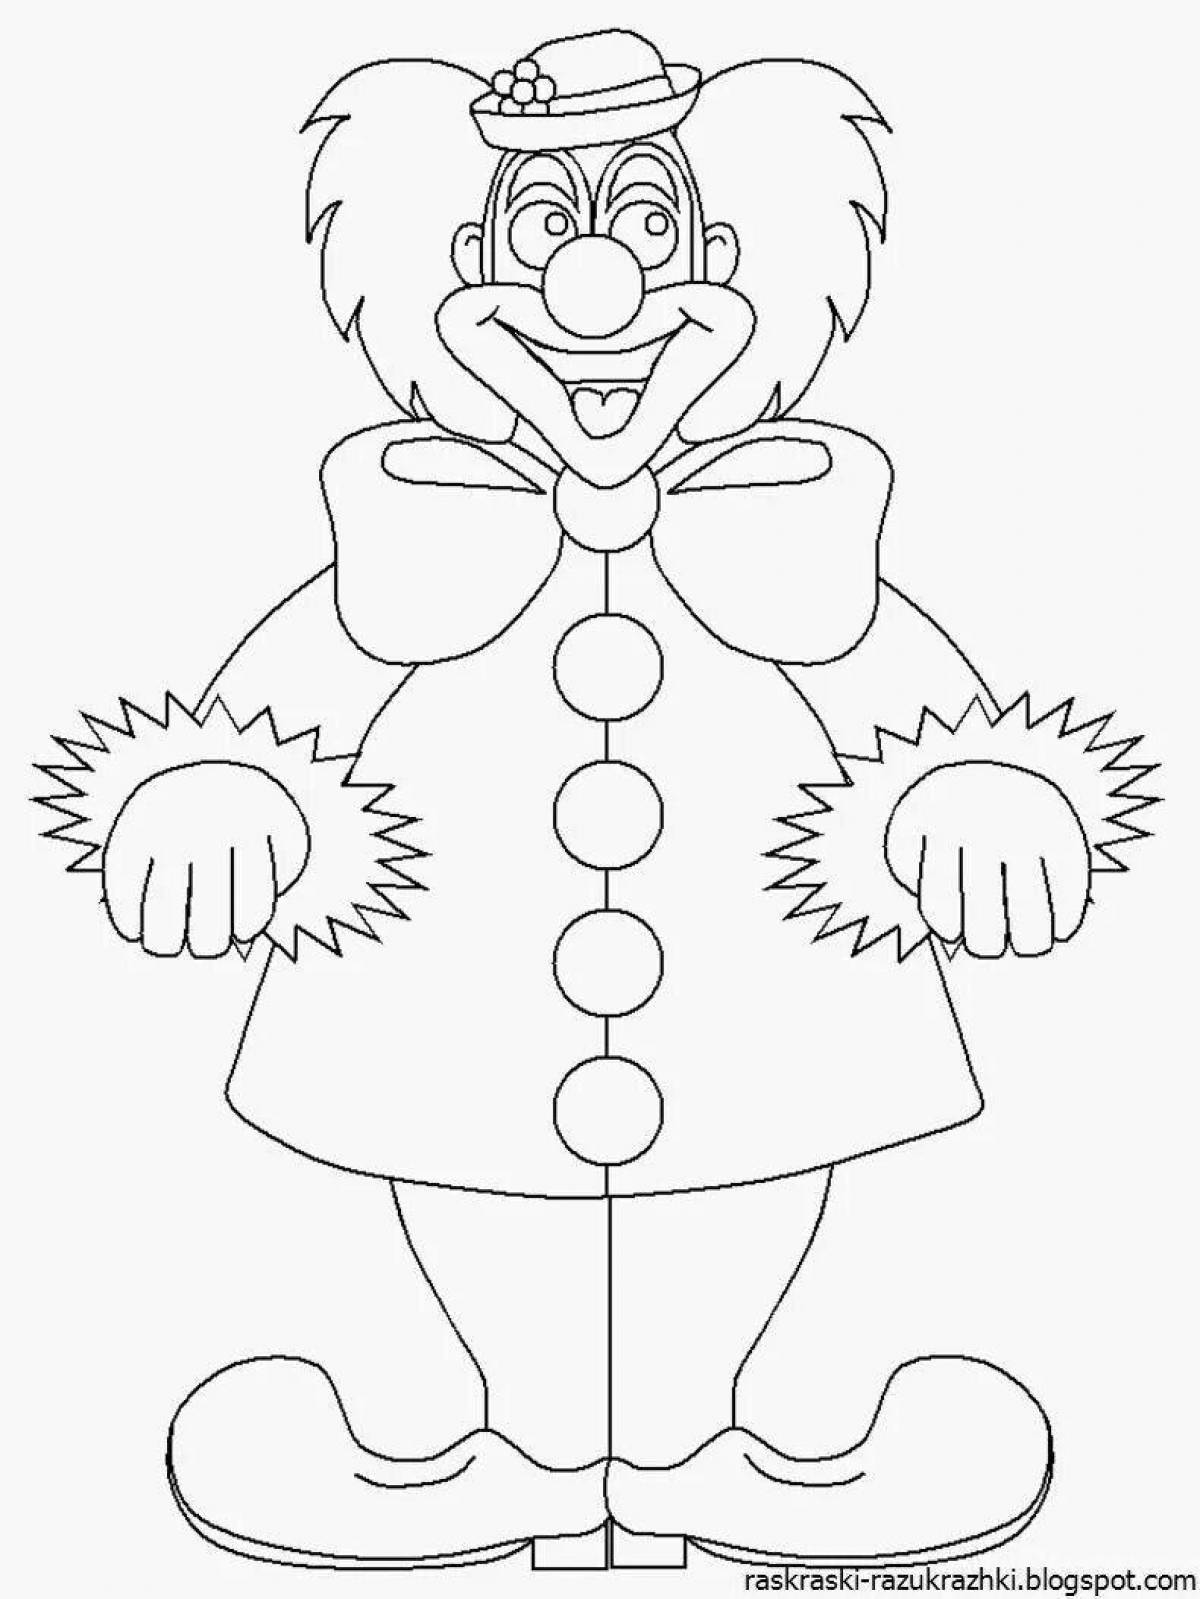 Vivacious coloring page funny clown for kids